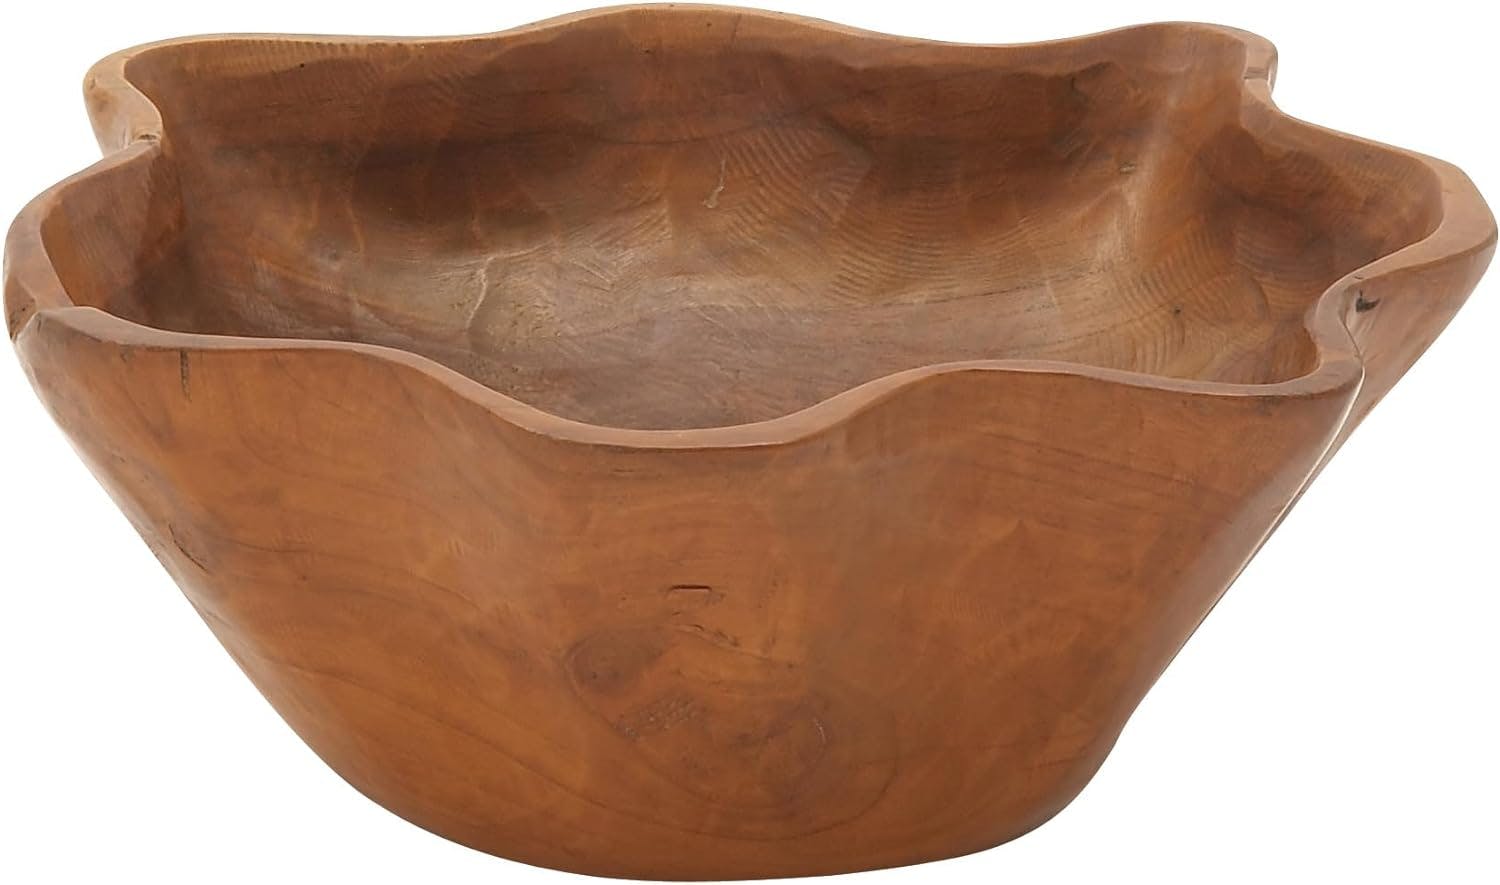 Handcrafted Teak Wood Lacquered Decorative Bowl with Stand, 14" x 12"